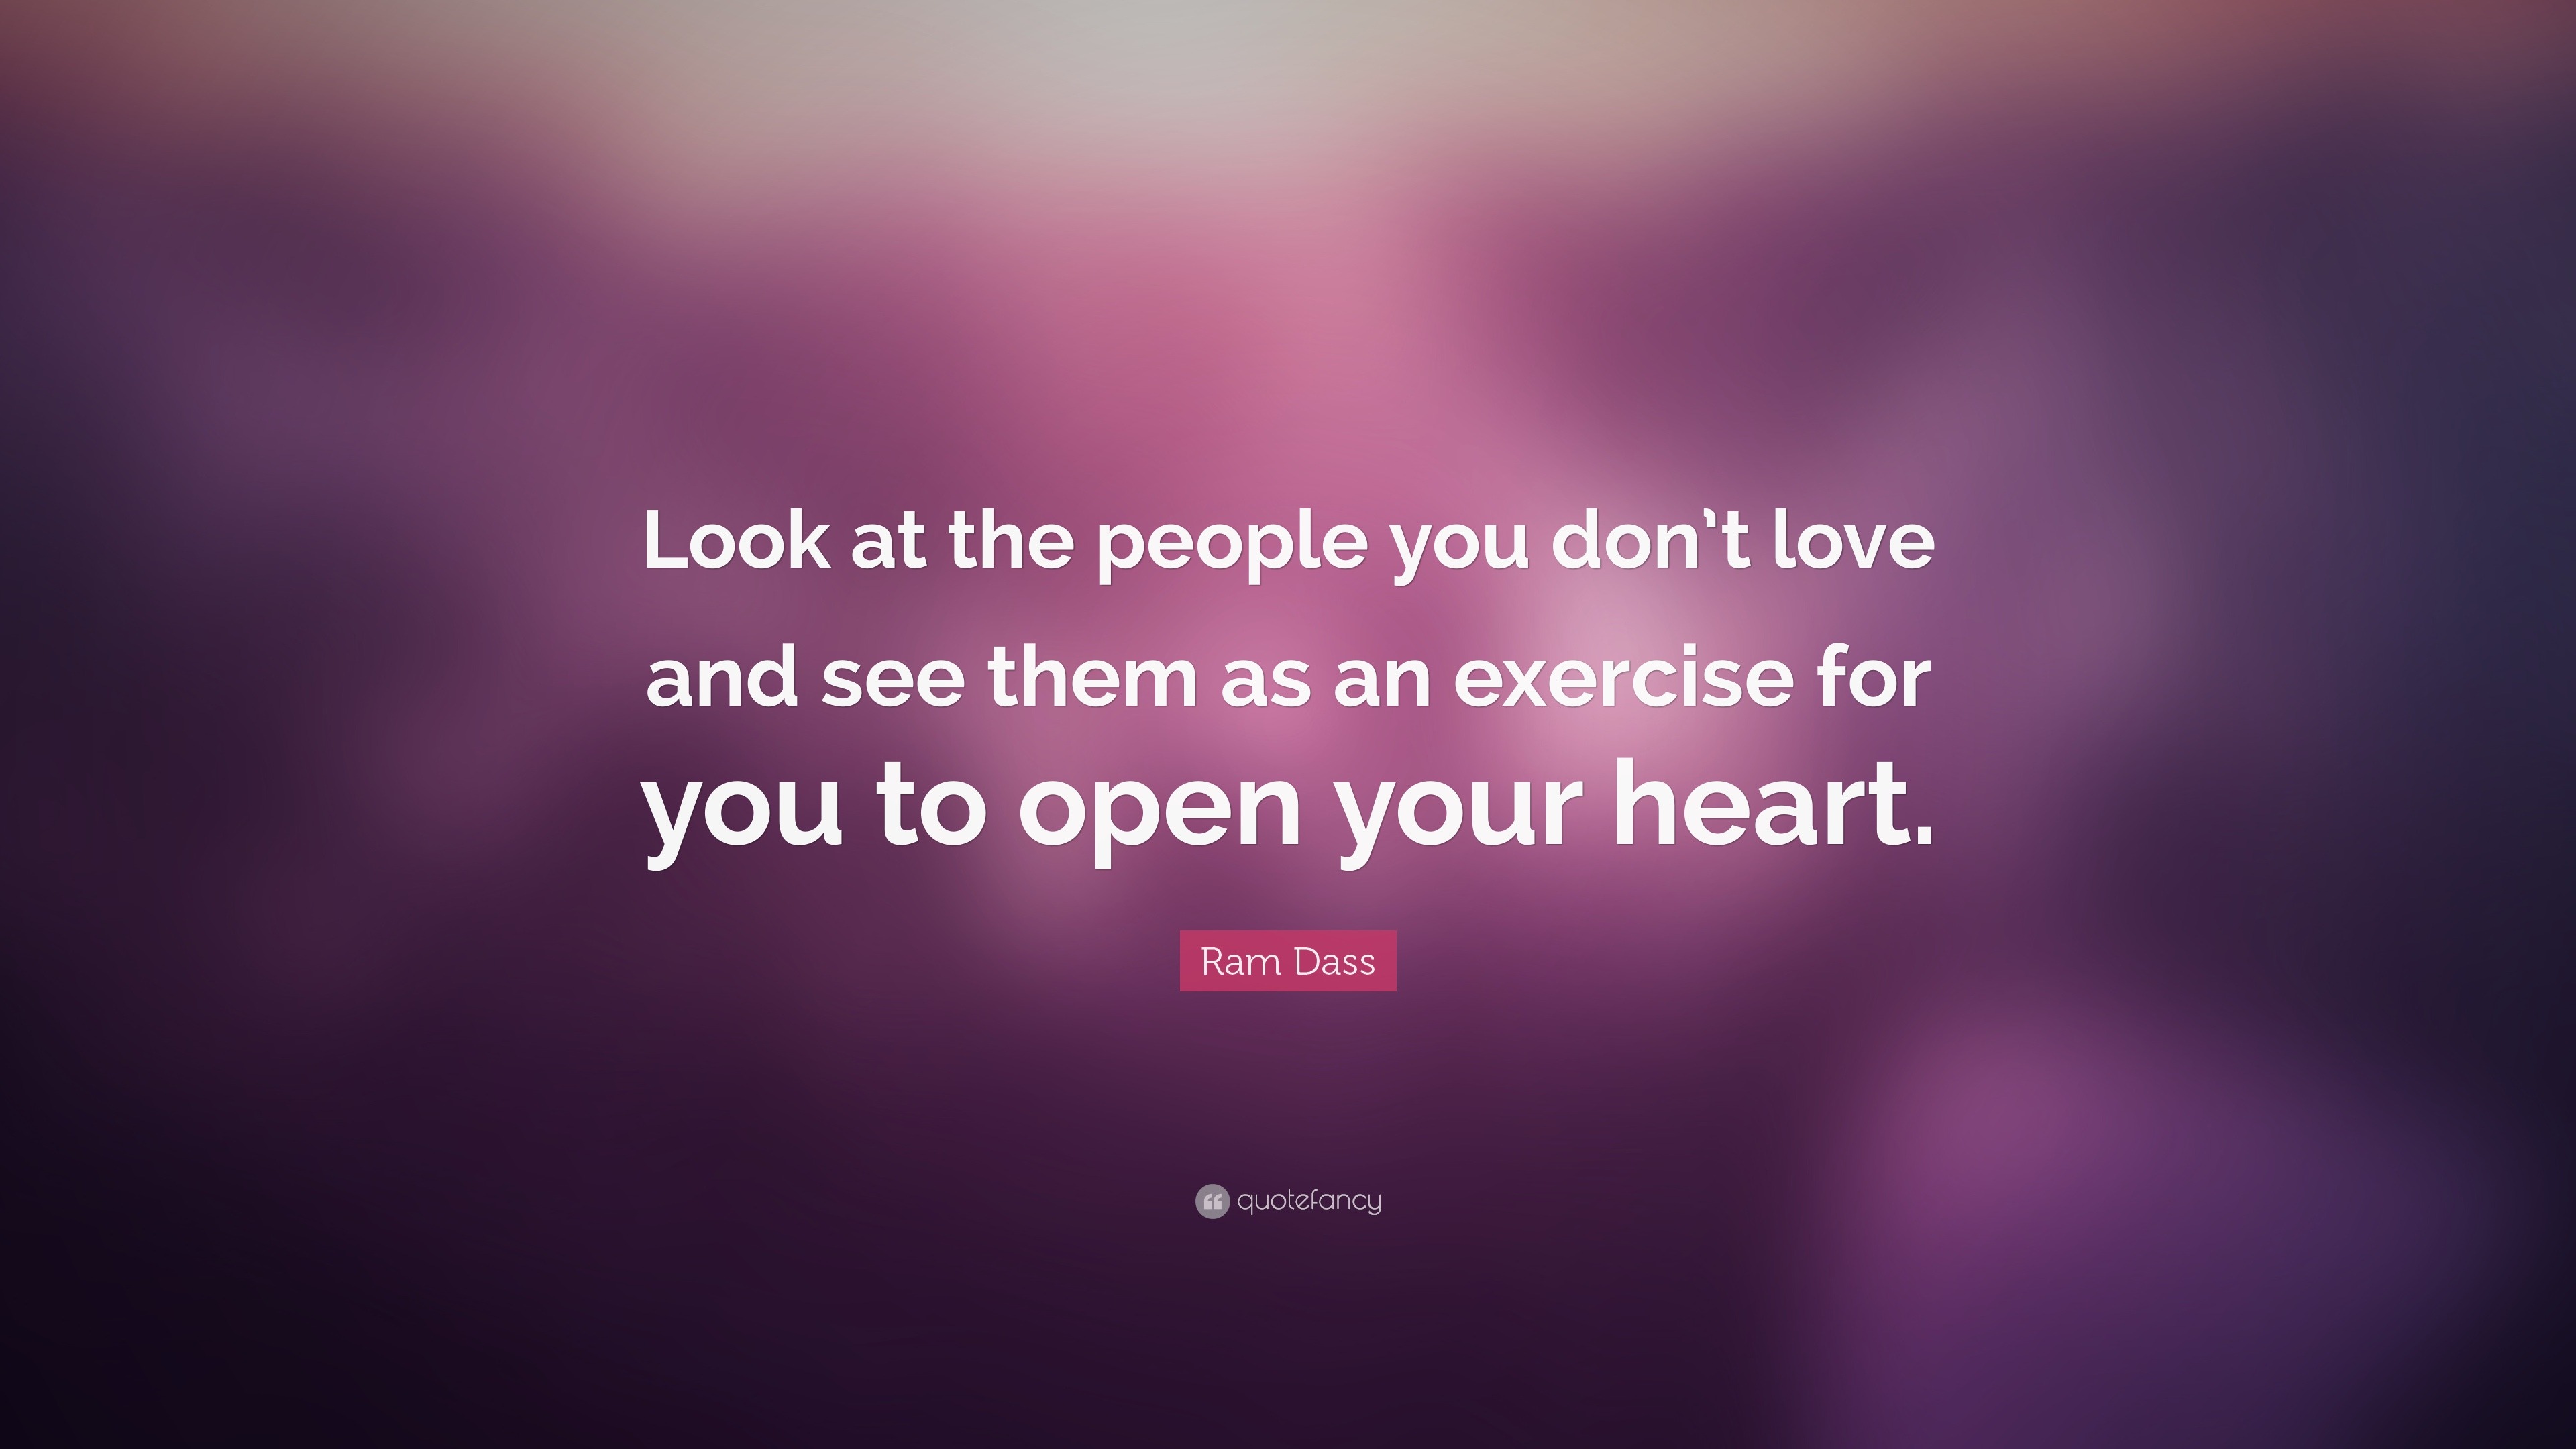 Ram Dass Quote “Look at the people you don t love and see